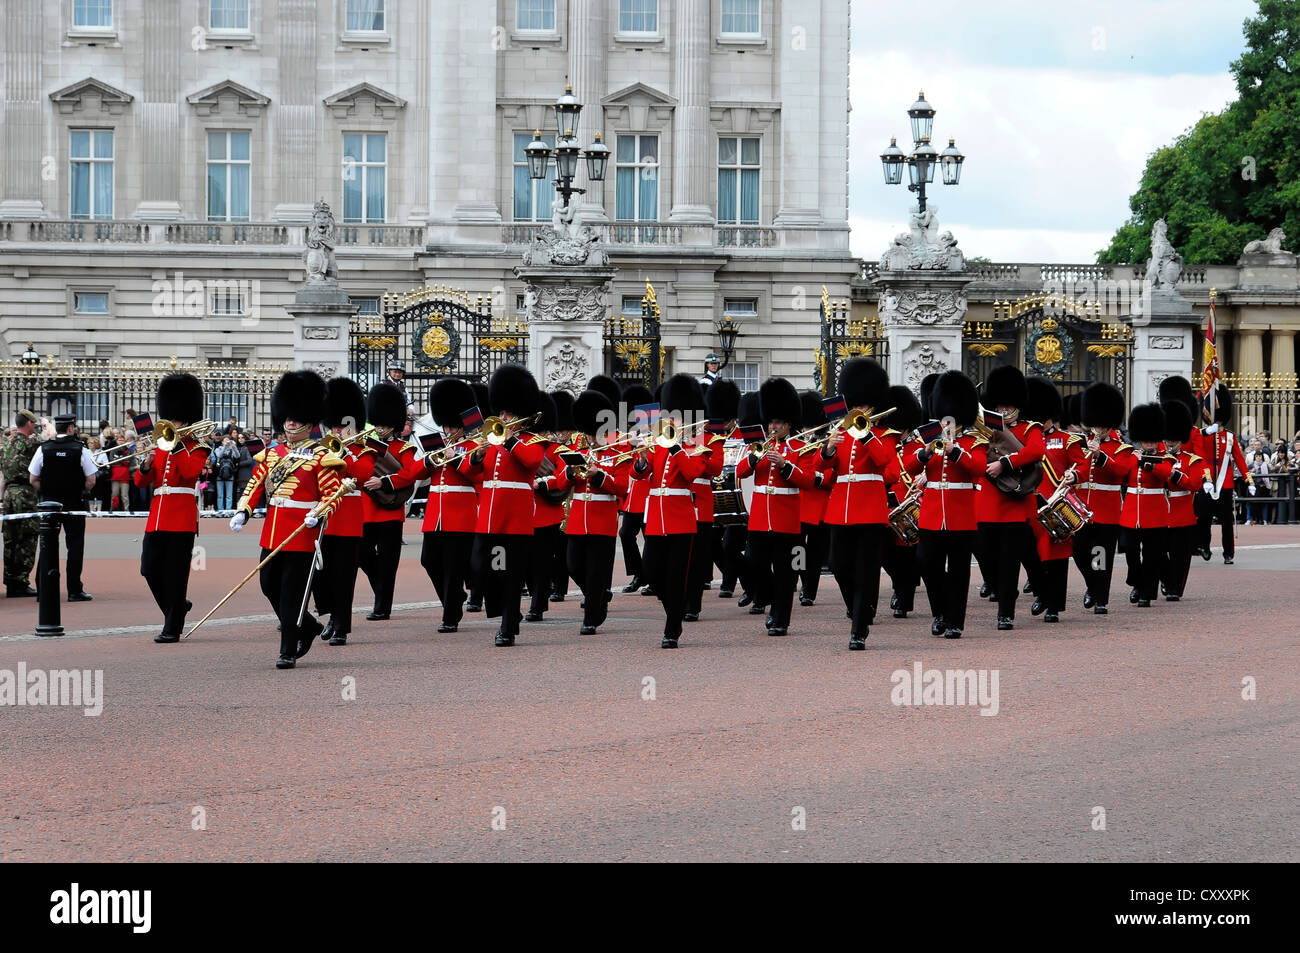 Royal Guard during the Changing of the Guard ceremony, Buckingham Palace, London, England, United Kingdom, Europe Stock Photo